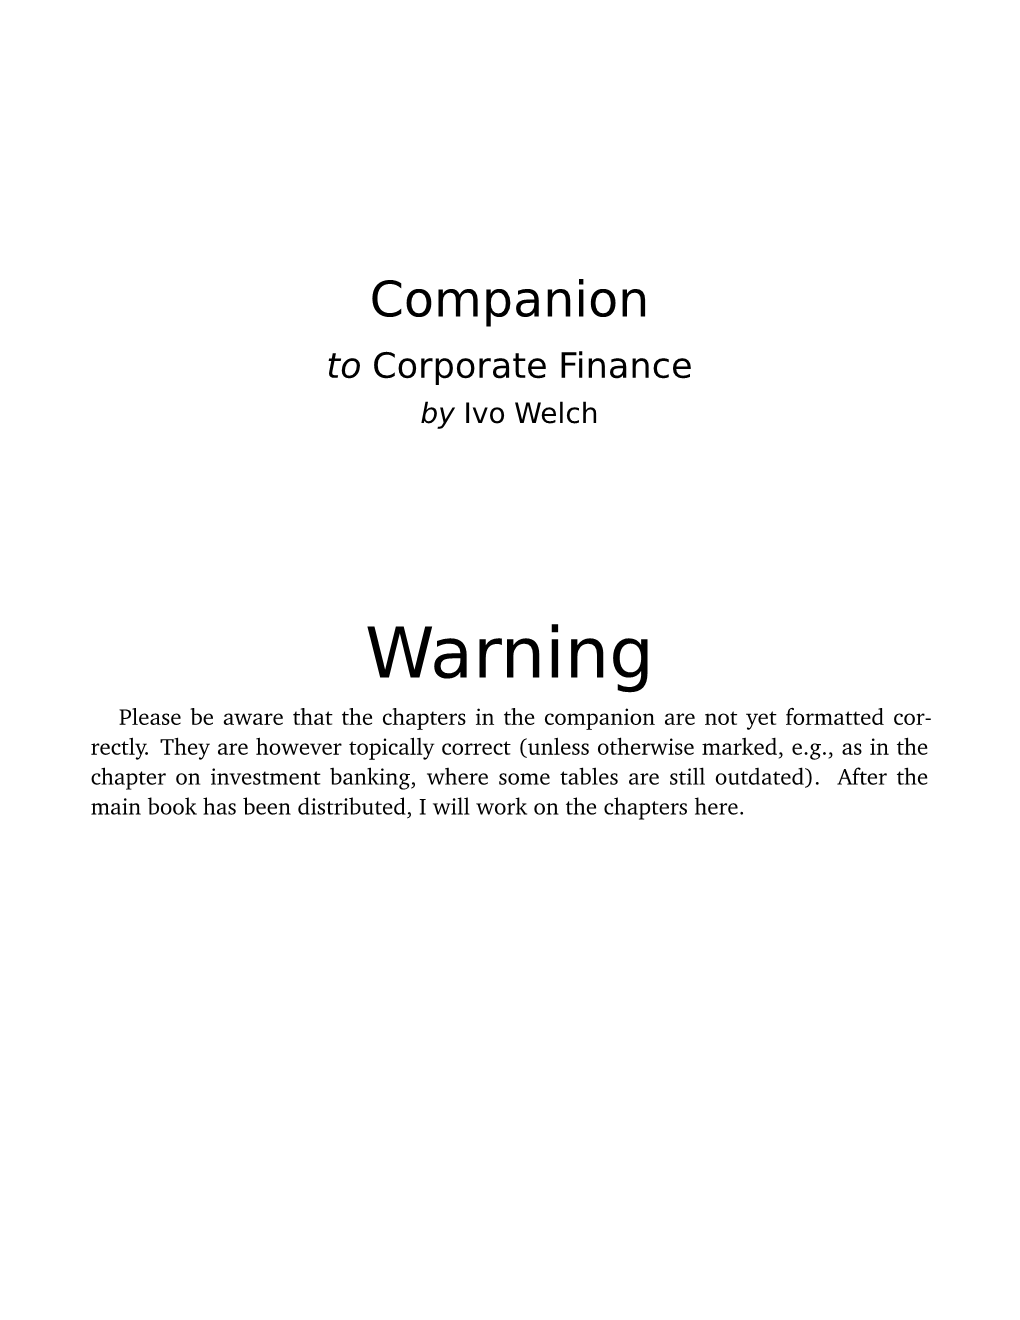 Companion to Corporate Finance by Ivo Welch